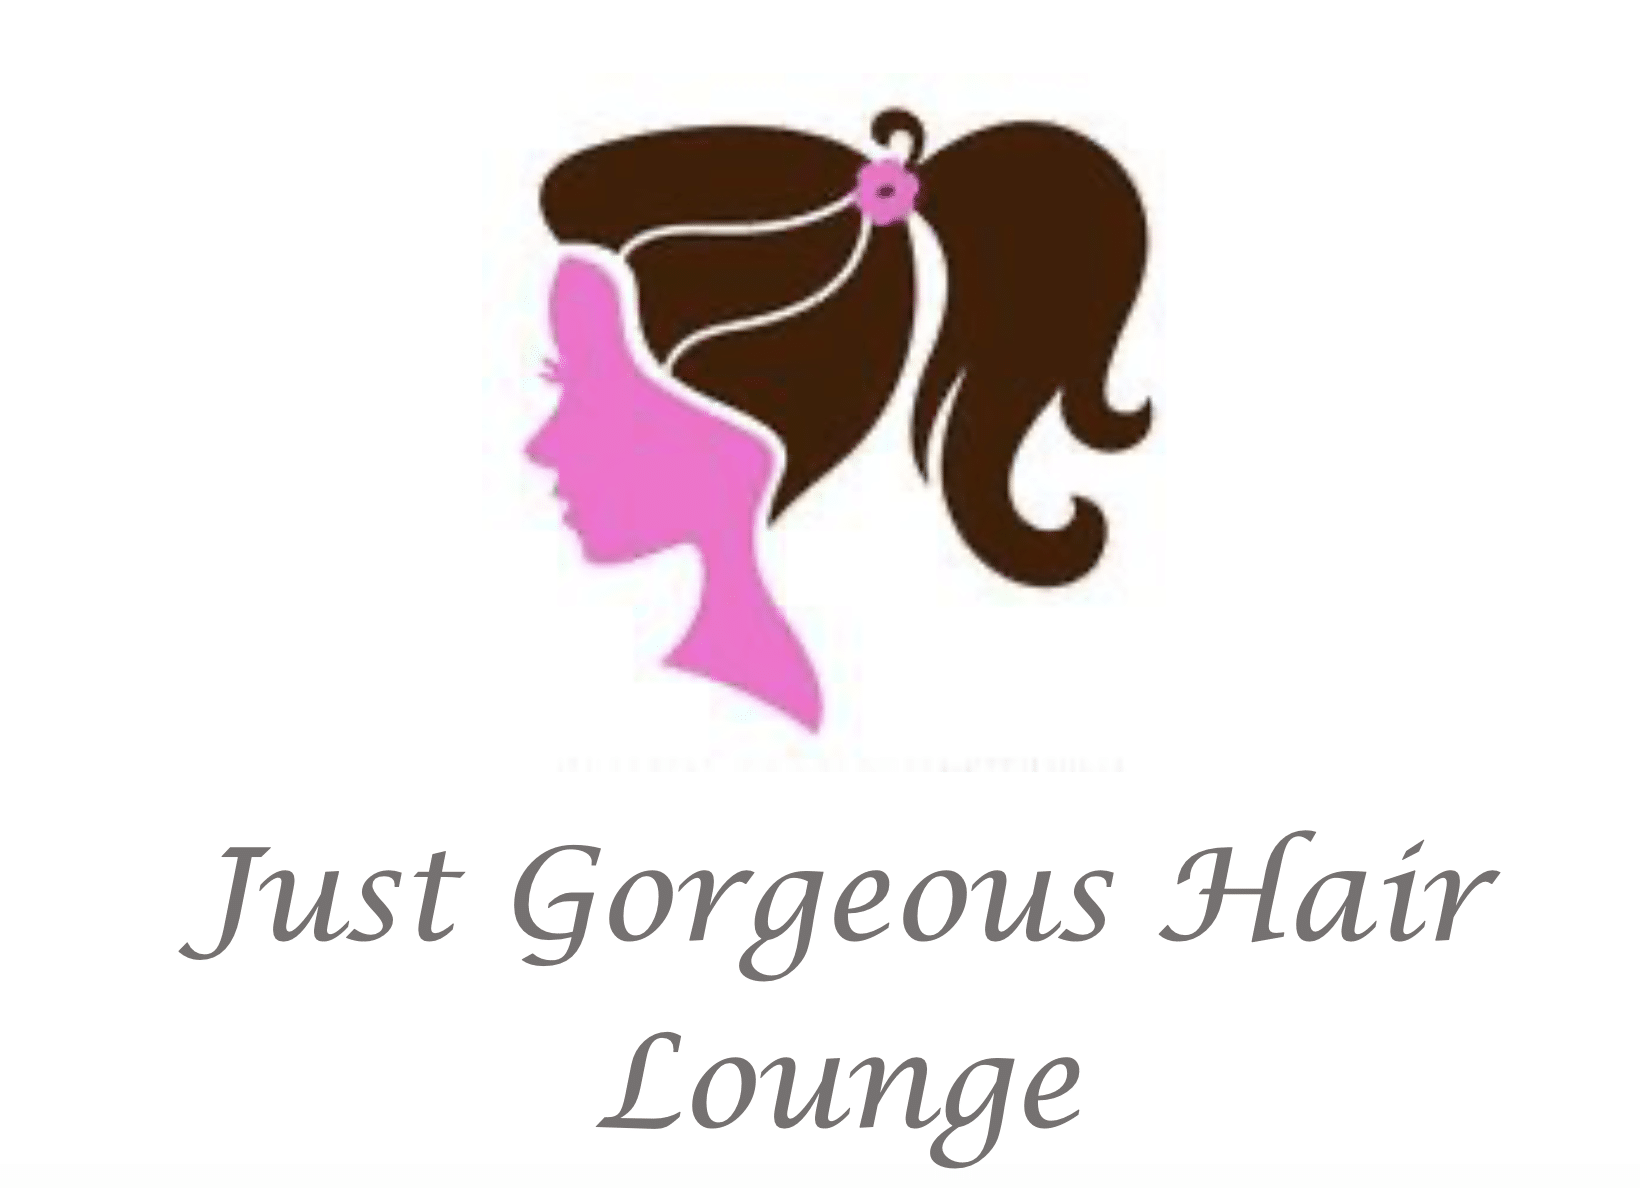 Just Gorgeous Hair Lounge